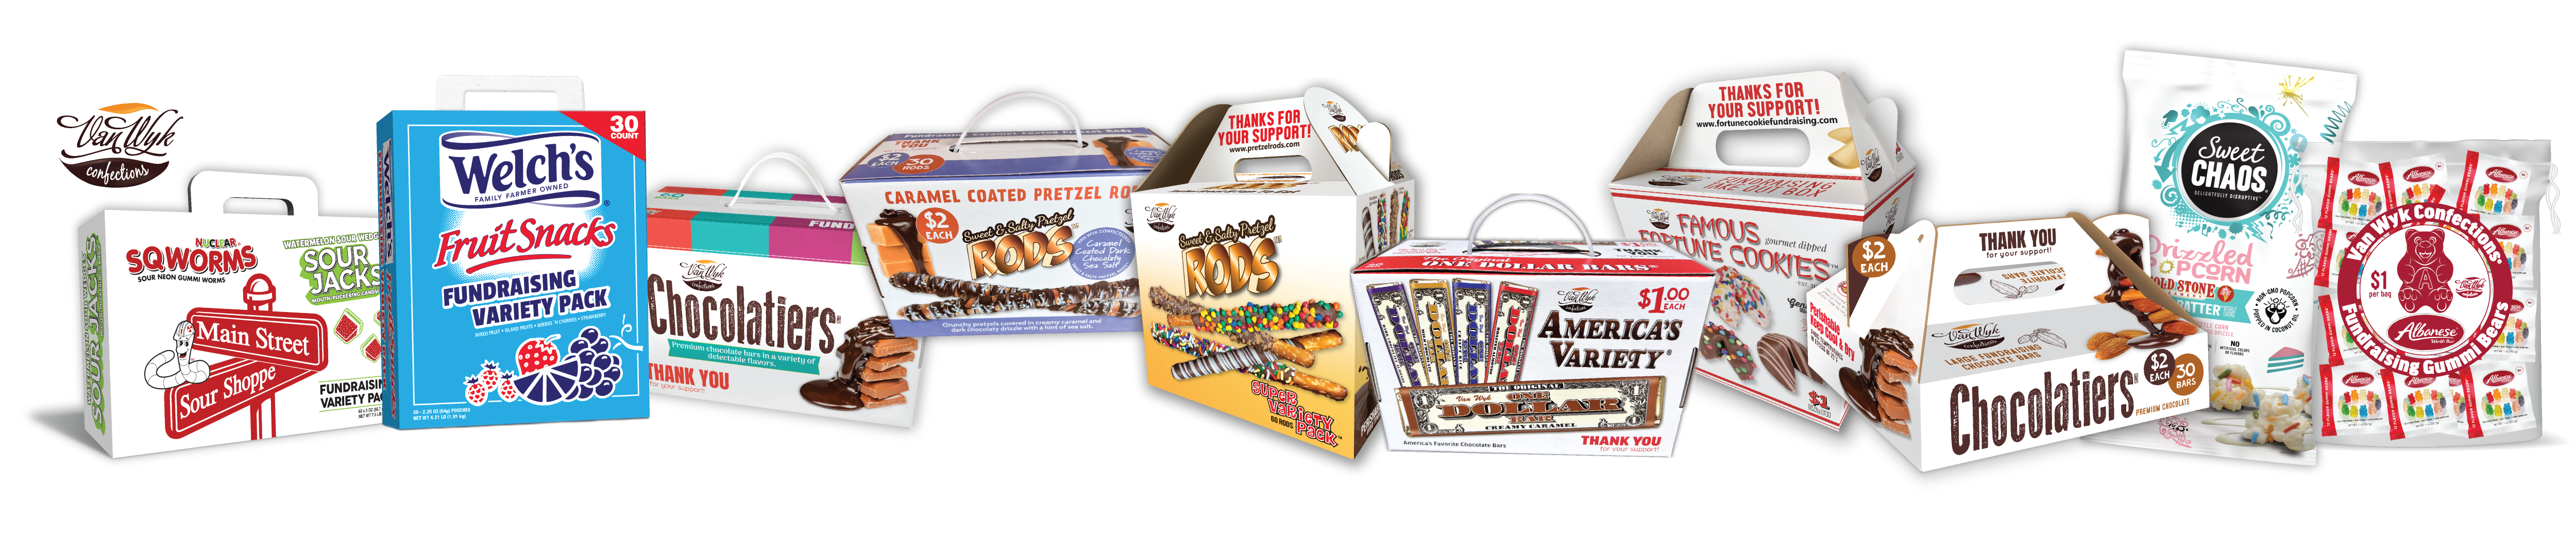 Van Wyk Confections Fundraising Products